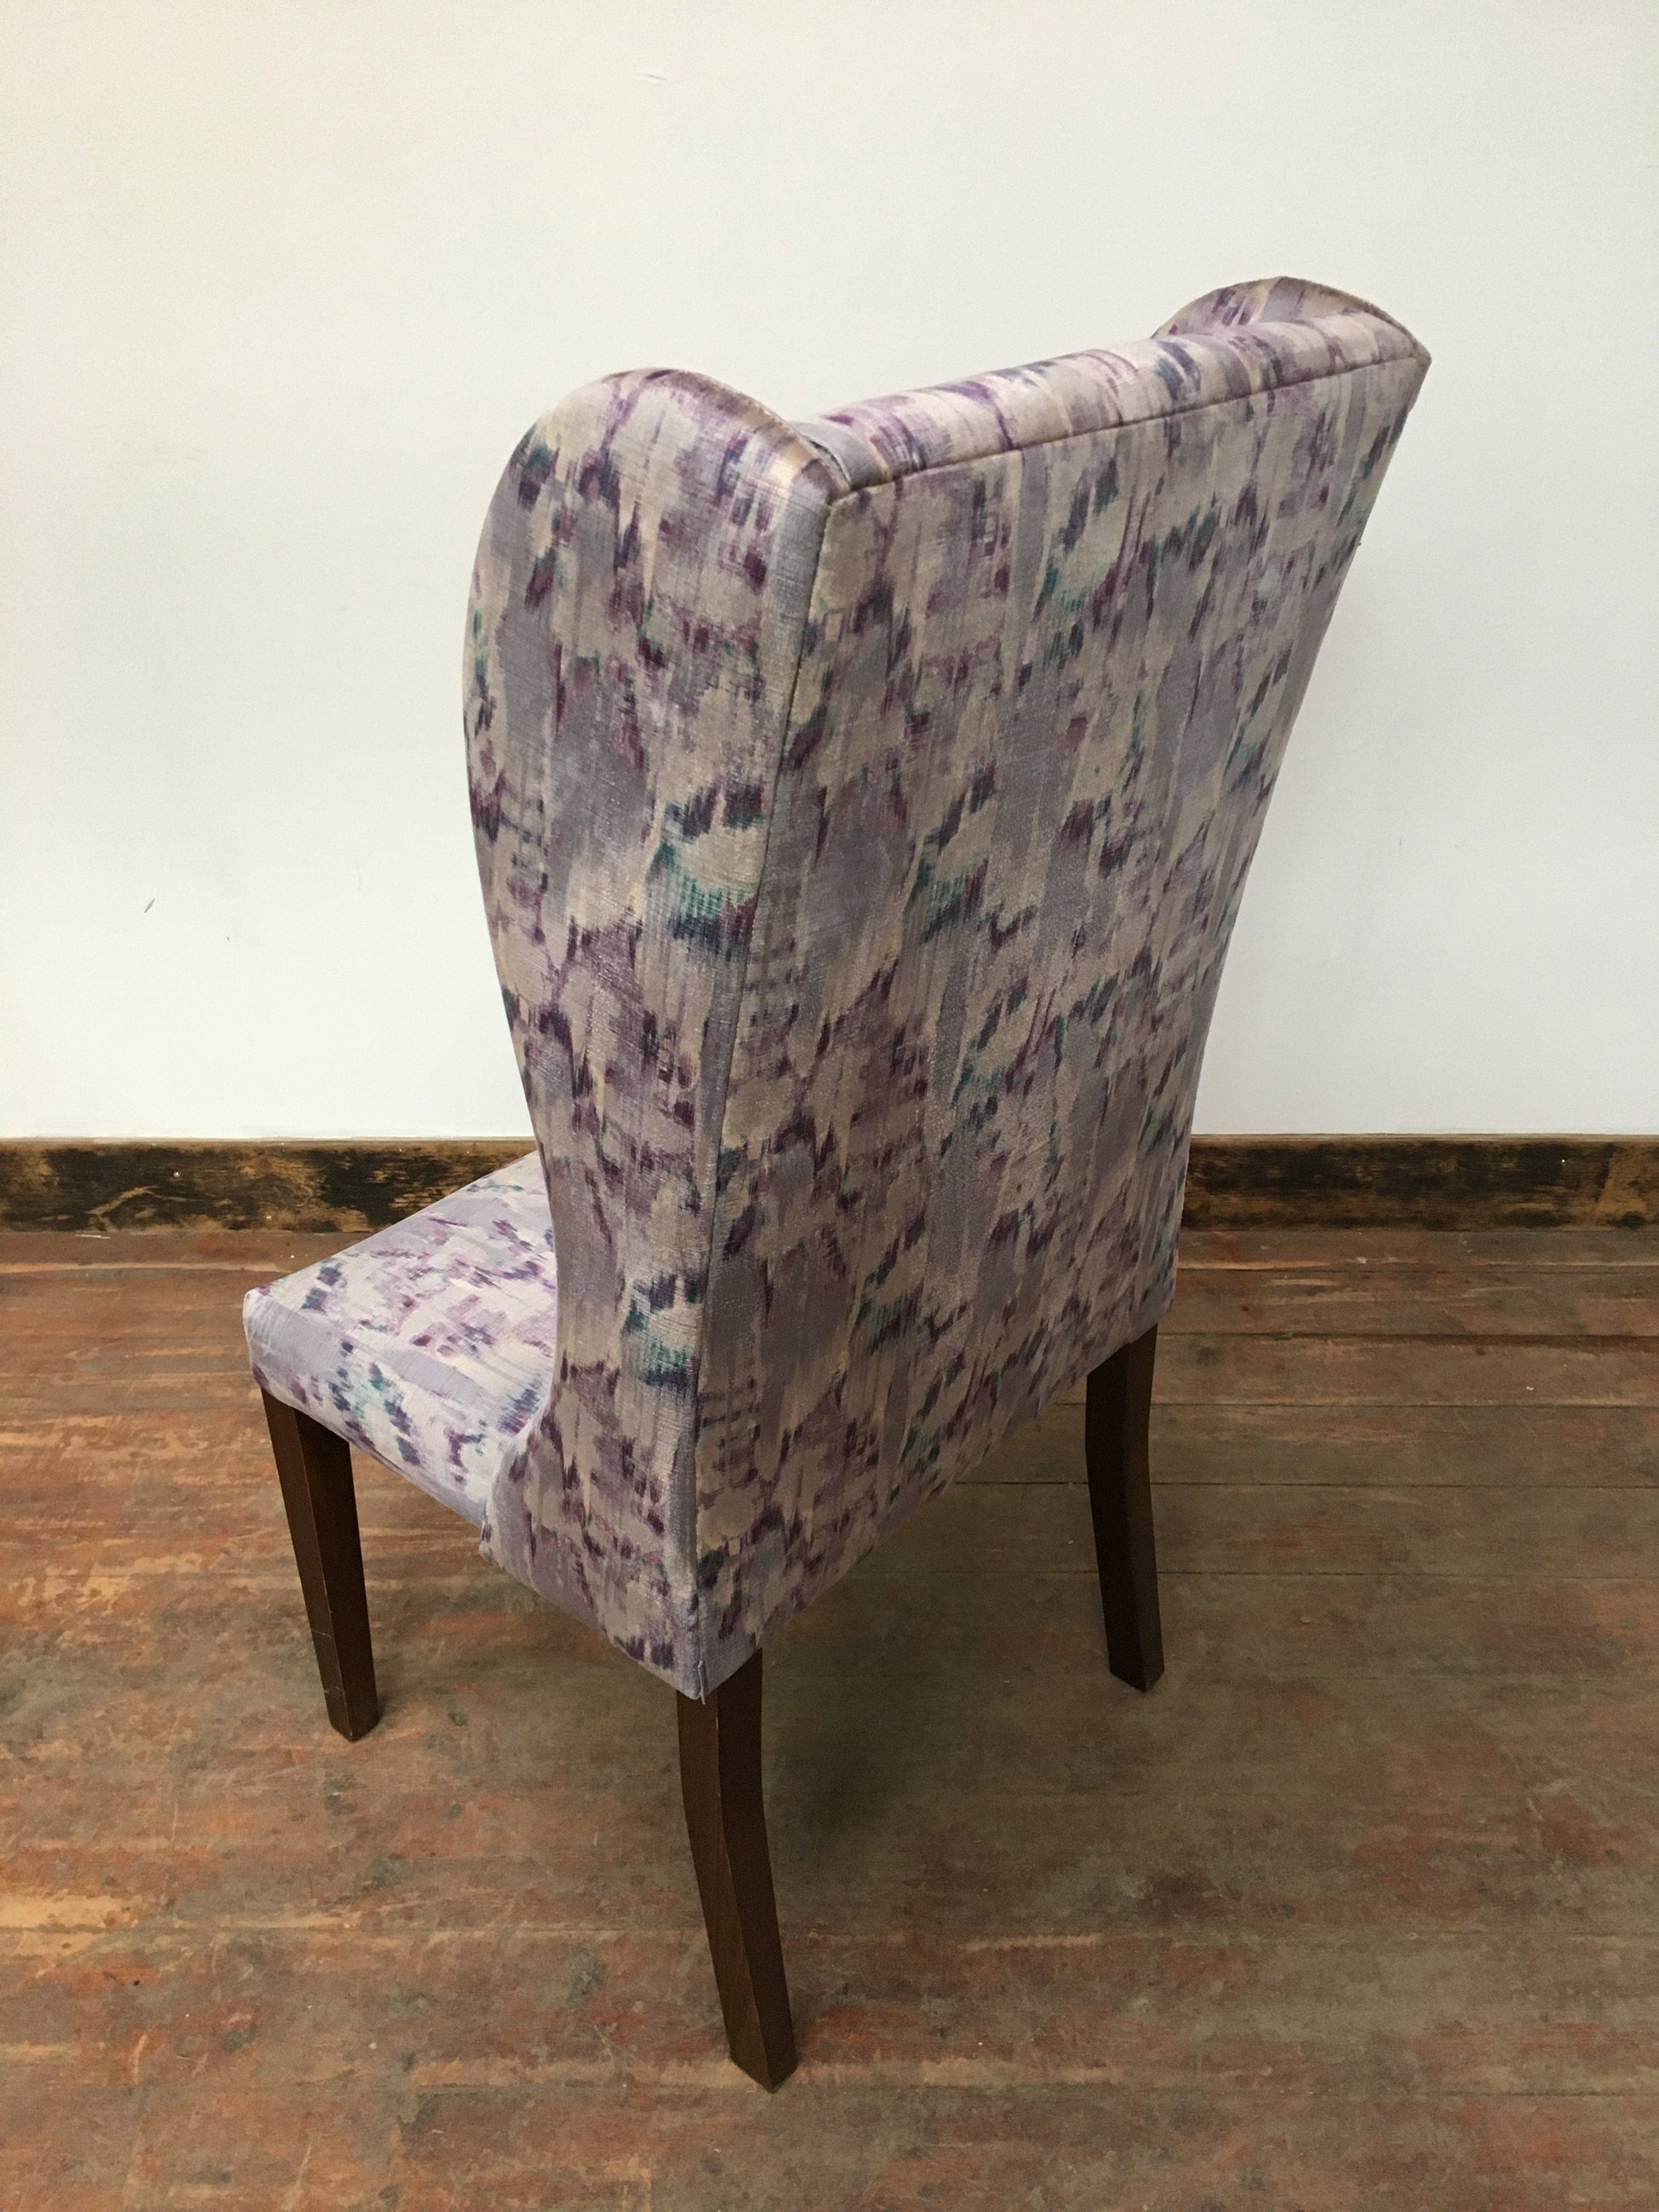 SILVER ANY LILAC BEDROOM CHAIR - Browsers Emporium